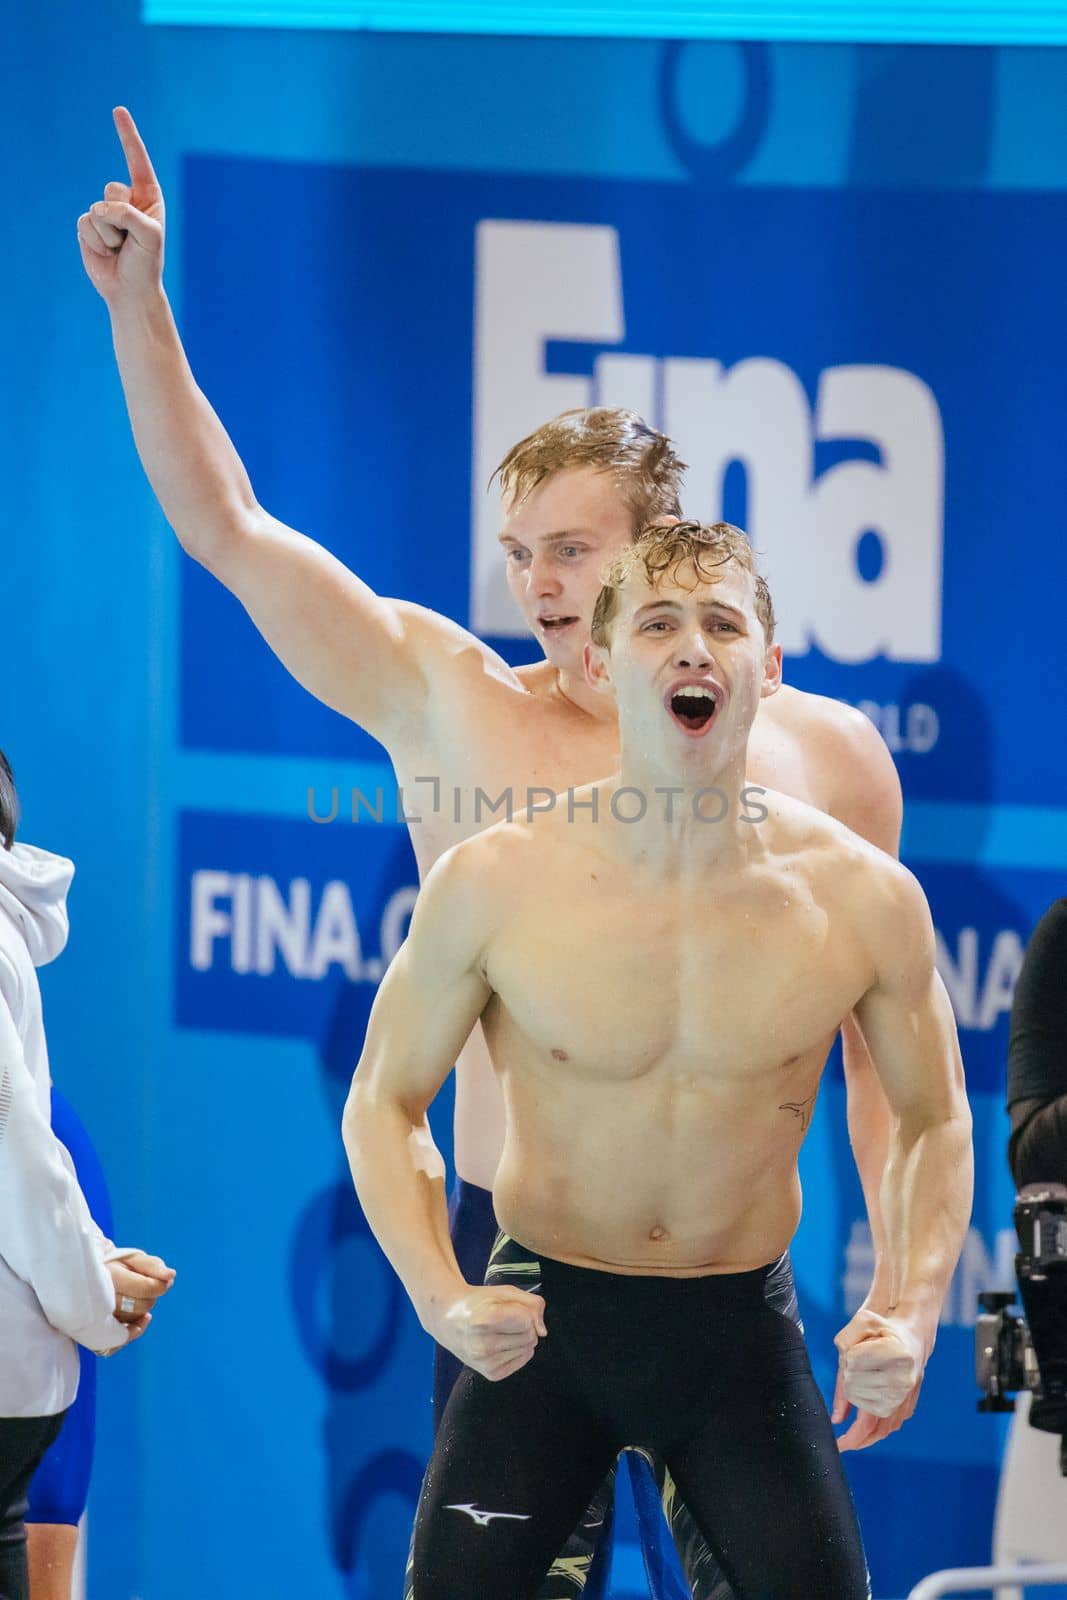 MELBOURNE, AUSTRALIA - DECEMBER 16: Team USA and Carson FOSTER celebrates winning the Men's 4x200m Freestyle final on day four of the 2022 FINA World Short Course Swimming Championships at Melbourne Sports and Aquatic Centre on December 16, 2022 in Melbourne, Australia